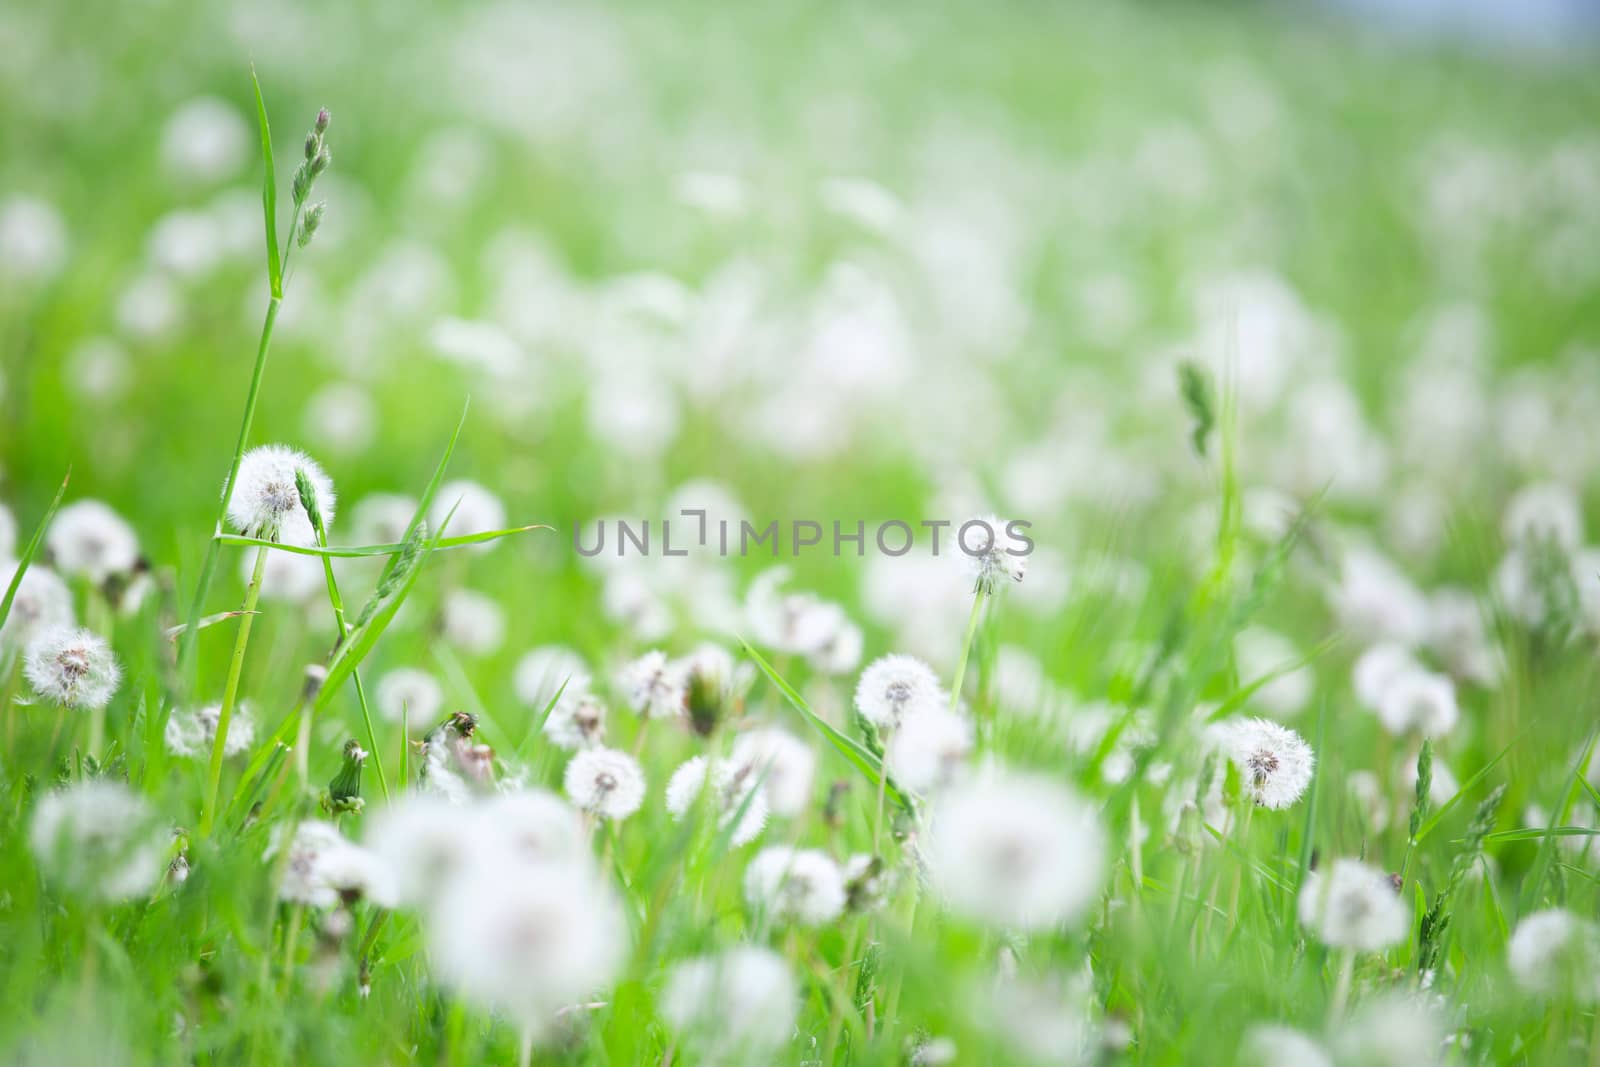 Summer field of white dandelions flowers natural background